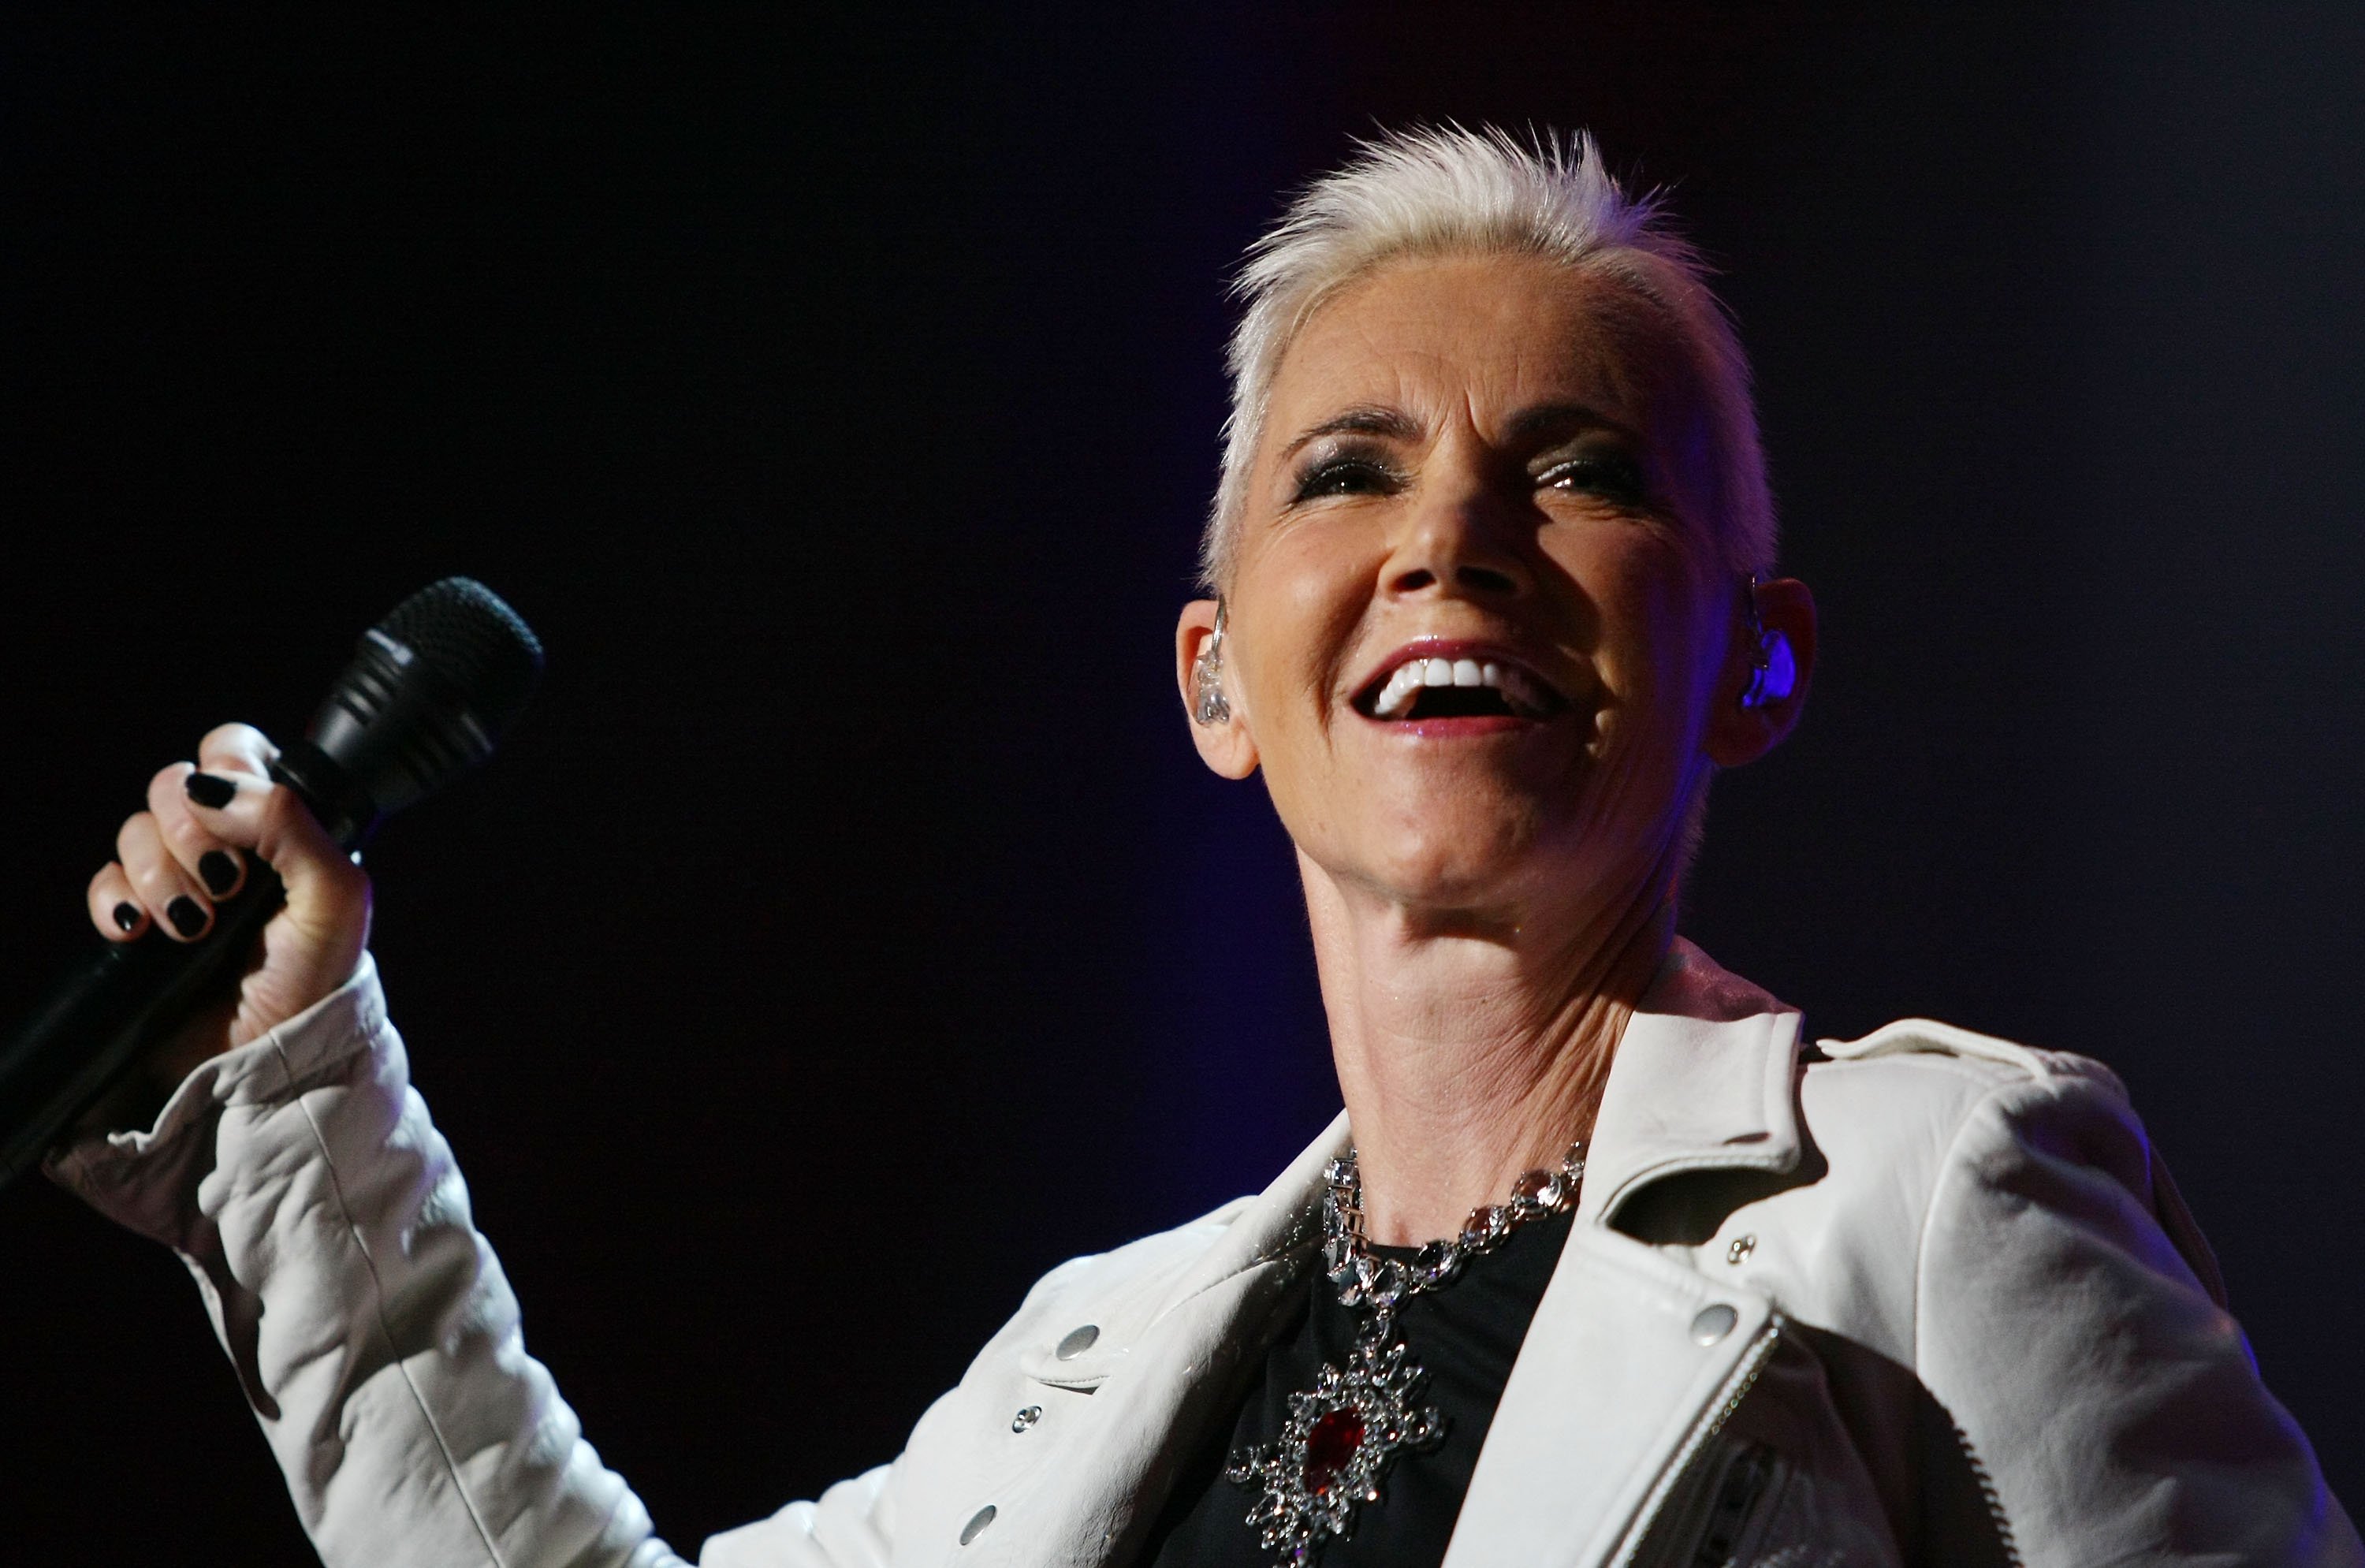 Marie Fredriksson of the Swedish band Roxette performs live during a concert at the Zitadelle Spandau on June 11, 2011 | Photo: GettyImages